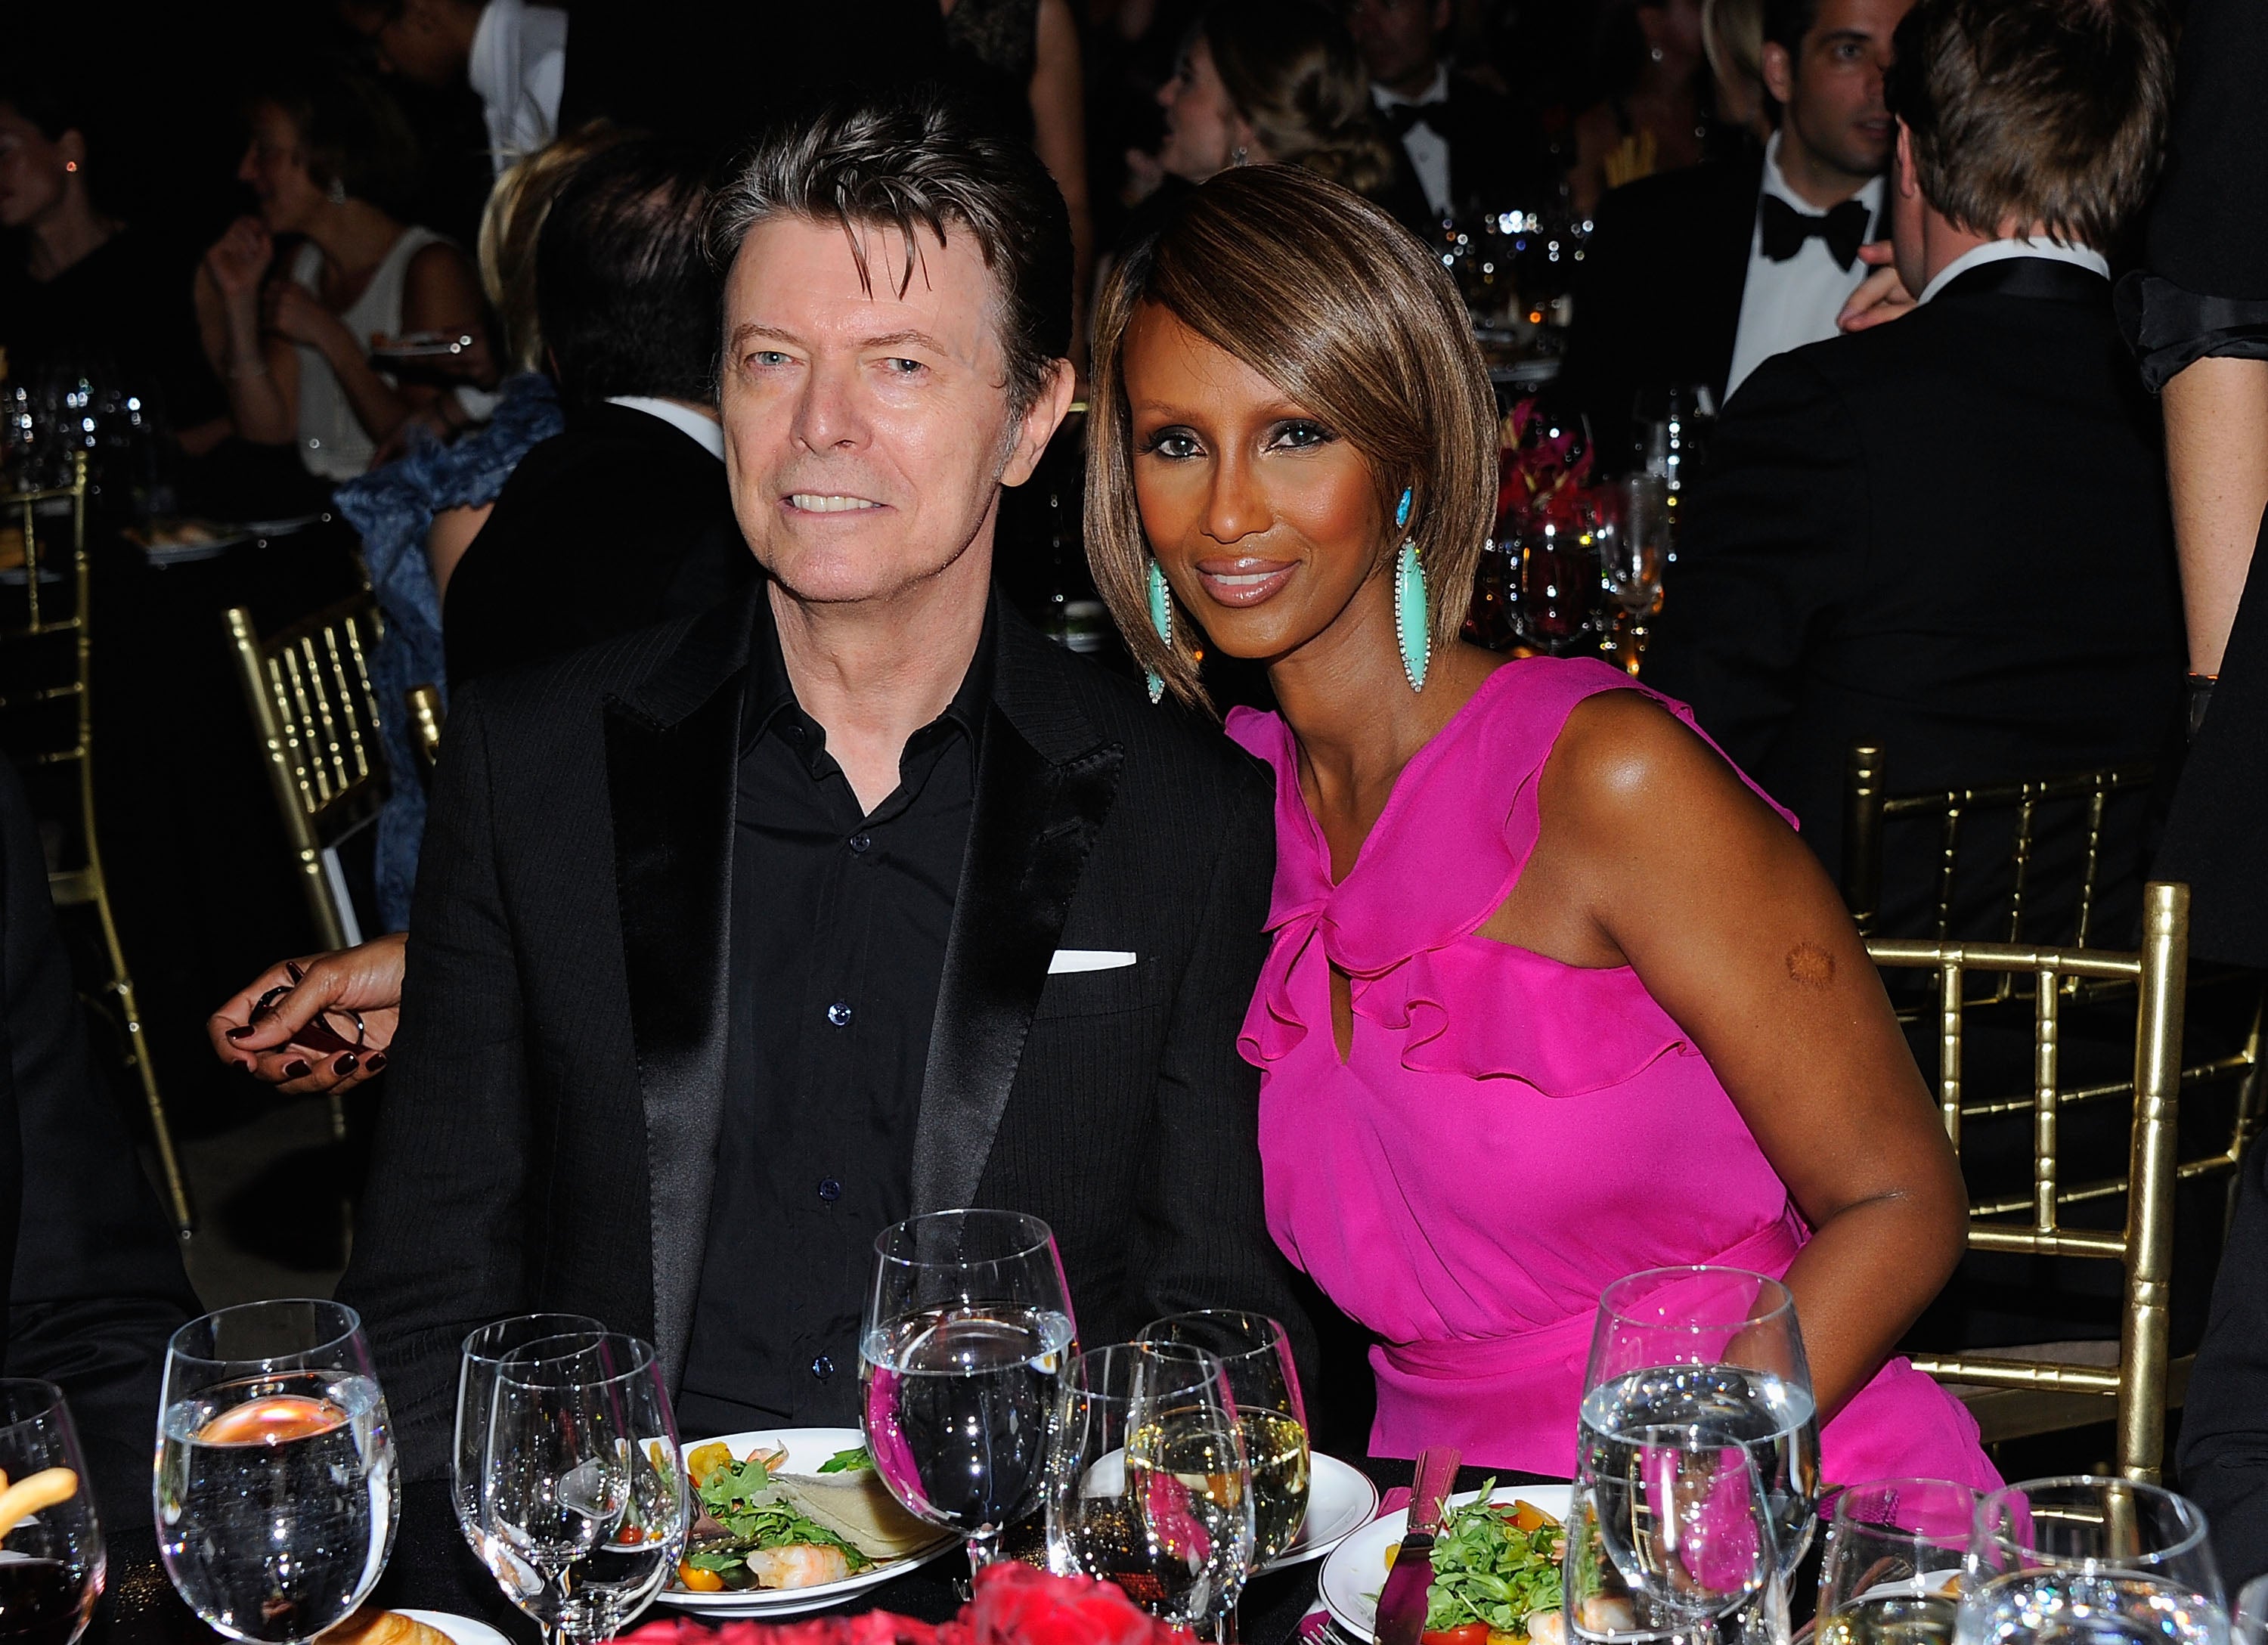 Iman says she’ll ‘never’ marry again after losing husband David Bowie.